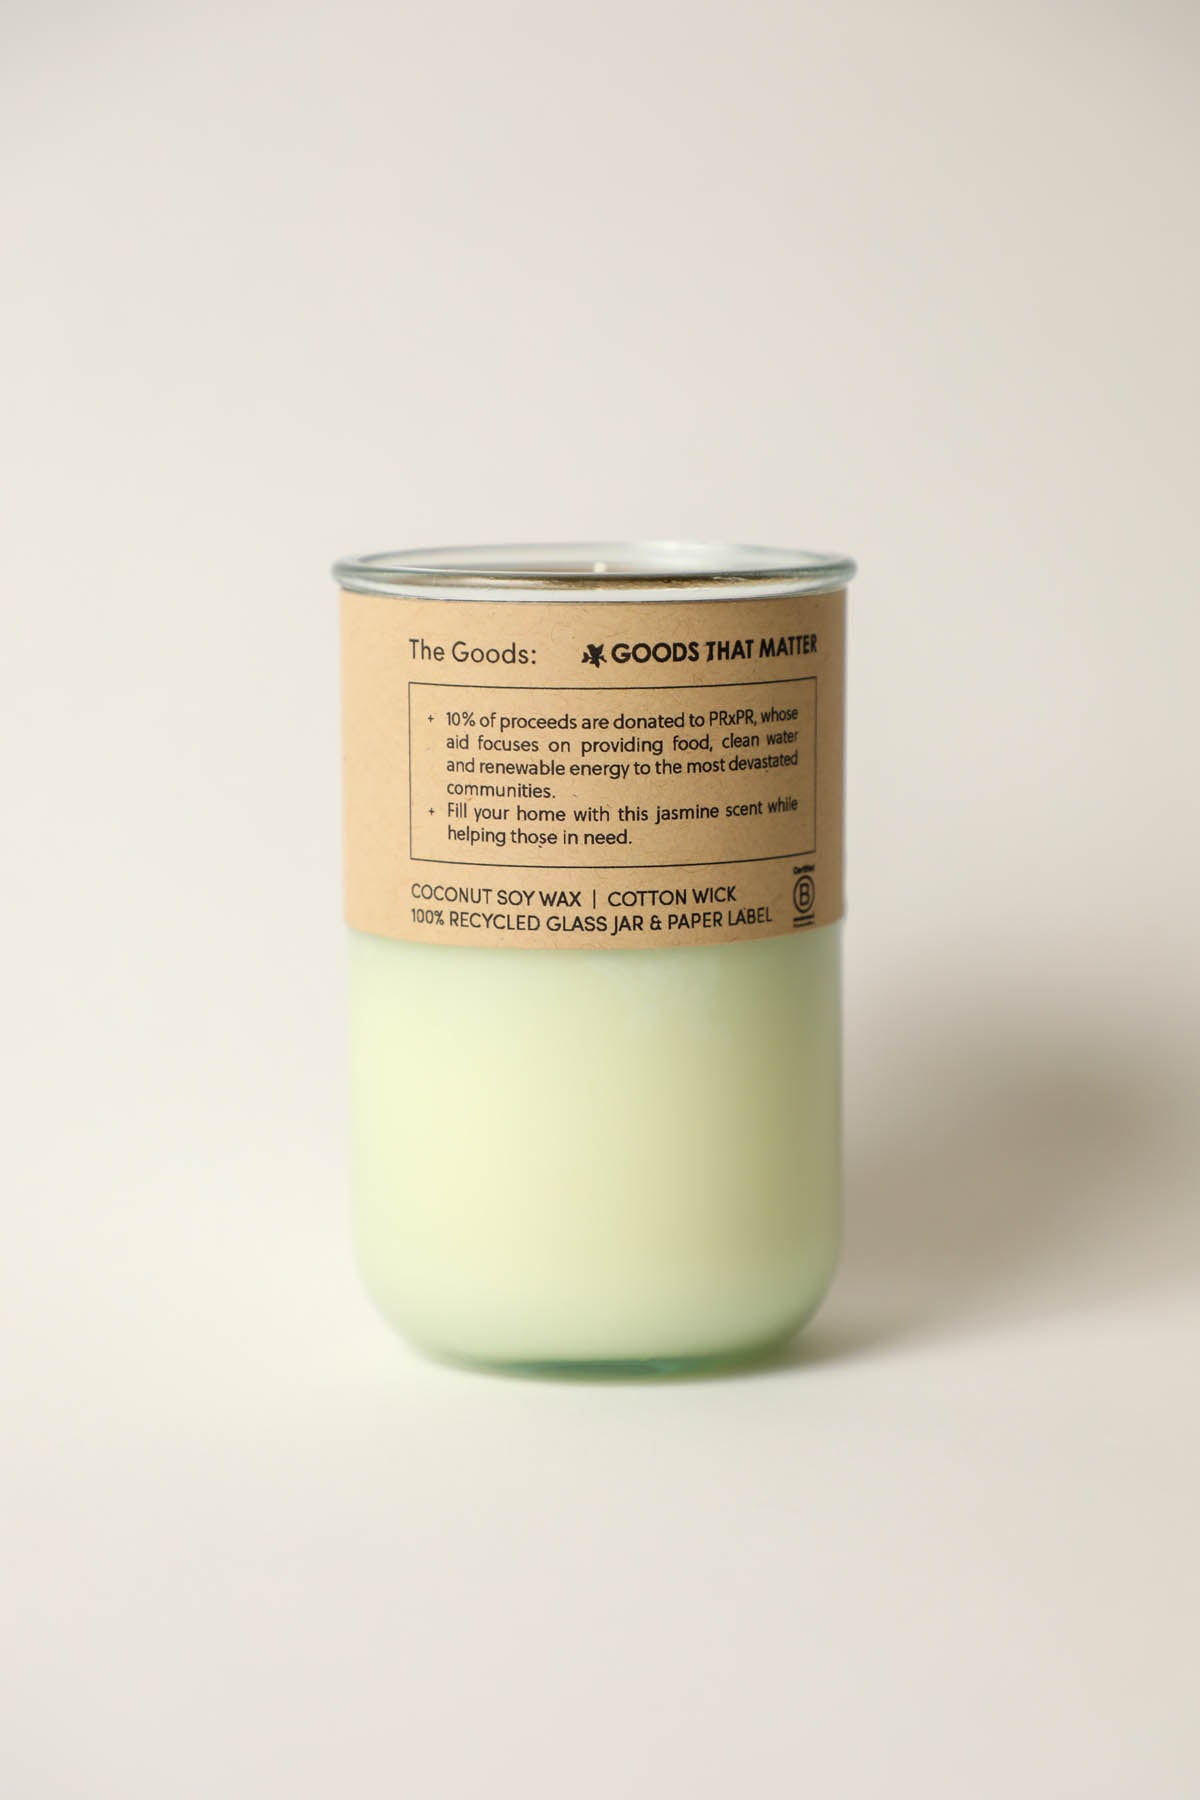 Rebuild, Puerto Rico Disaster Relief / Jasmine Scent: Candles for Good